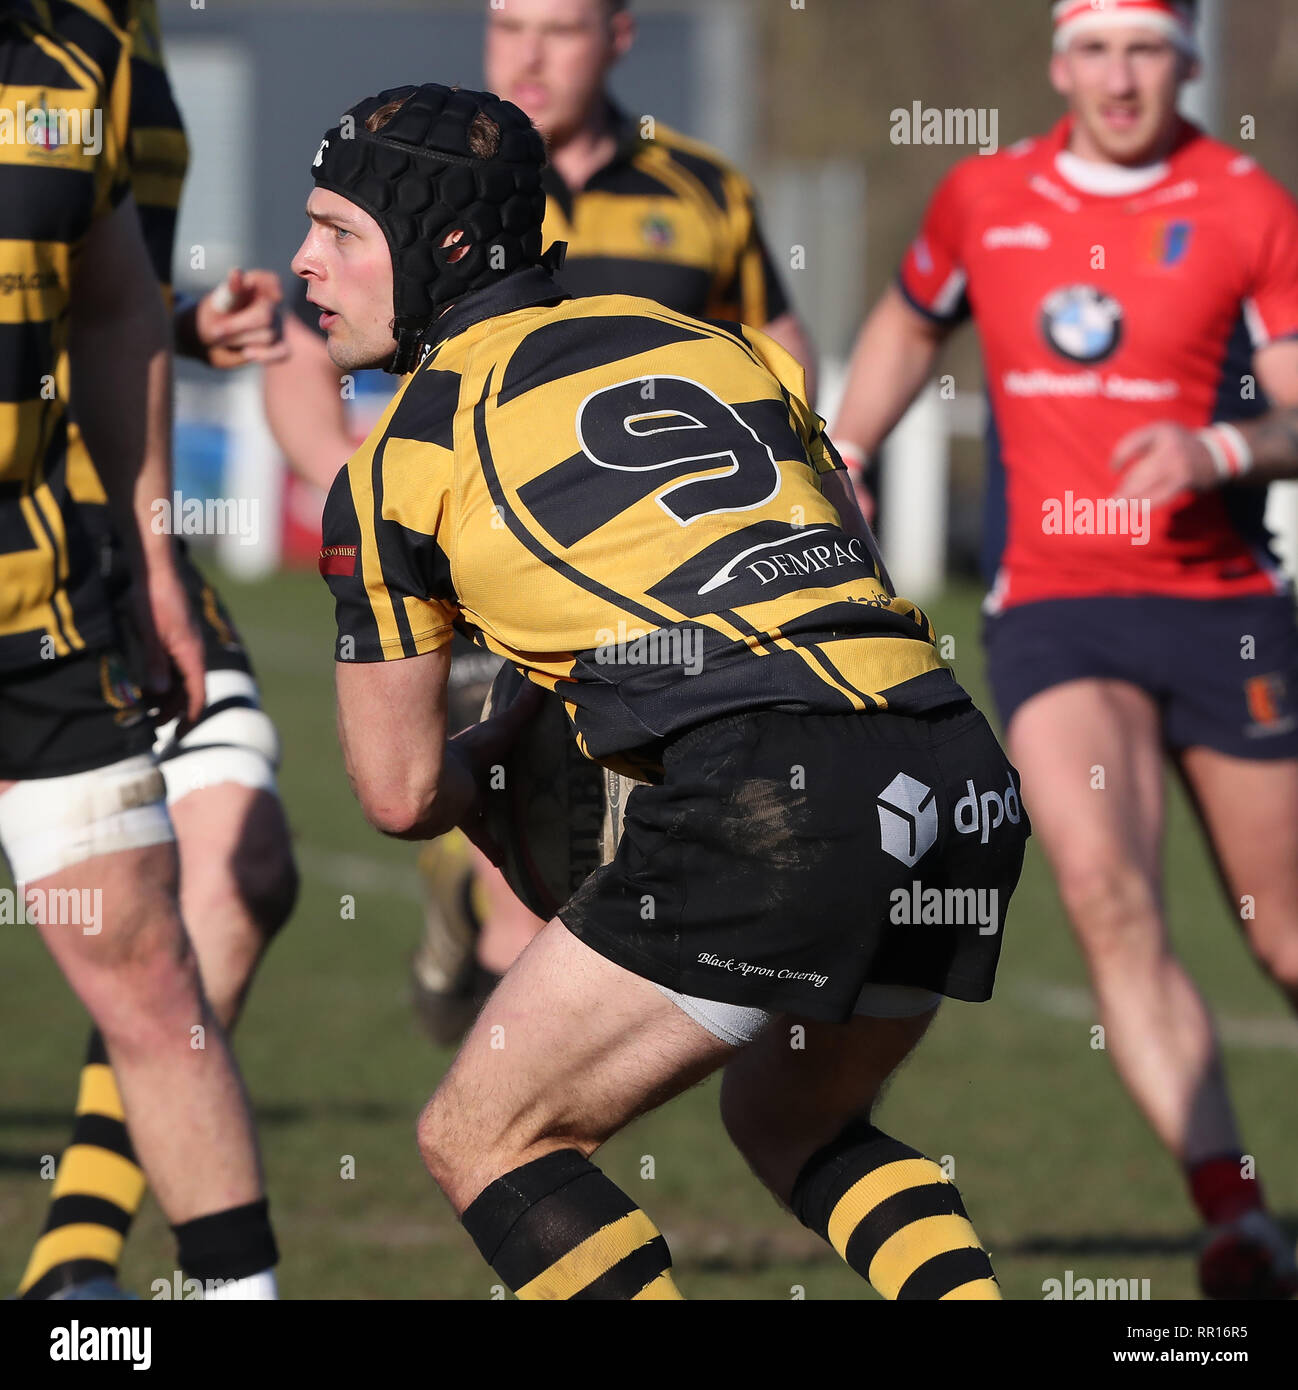 23.02.2019 Hinckley, Leicester, England. Rugby Union, Hinckley rfc v Chester rfc.   Ben Pointon clears the lines for Hinckley during the RFU National  Stock Photo